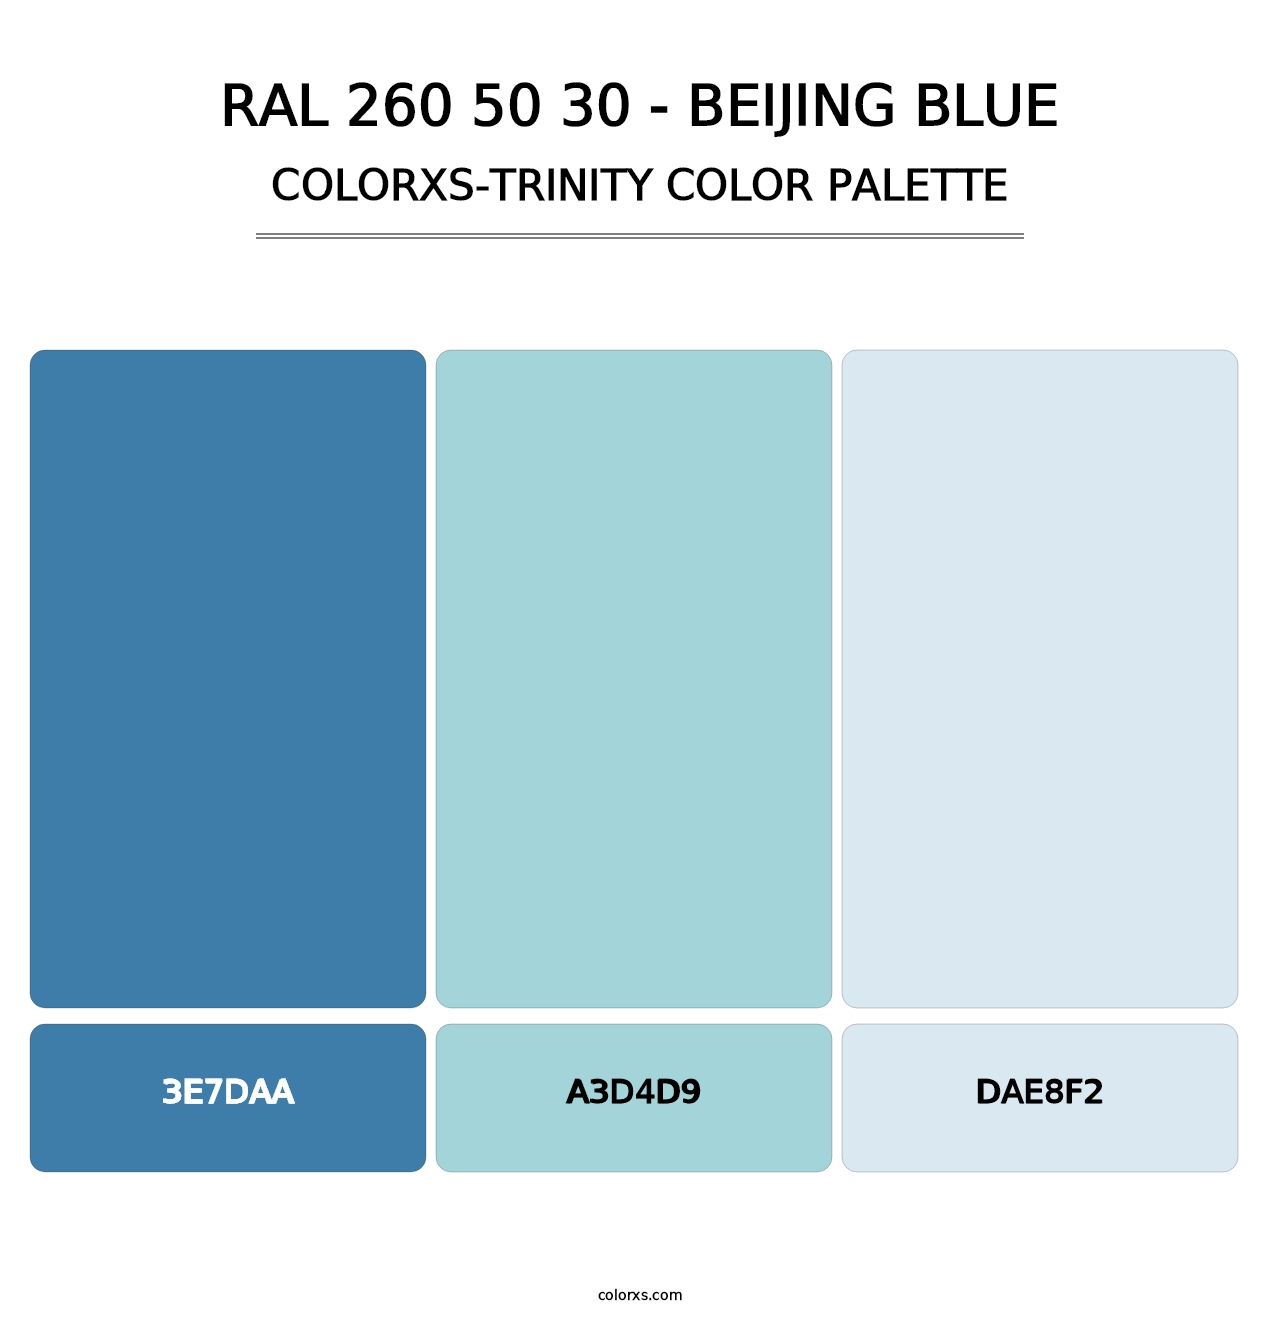 RAL 260 50 30 - Beijing Blue - Colorxs Trinity Palette